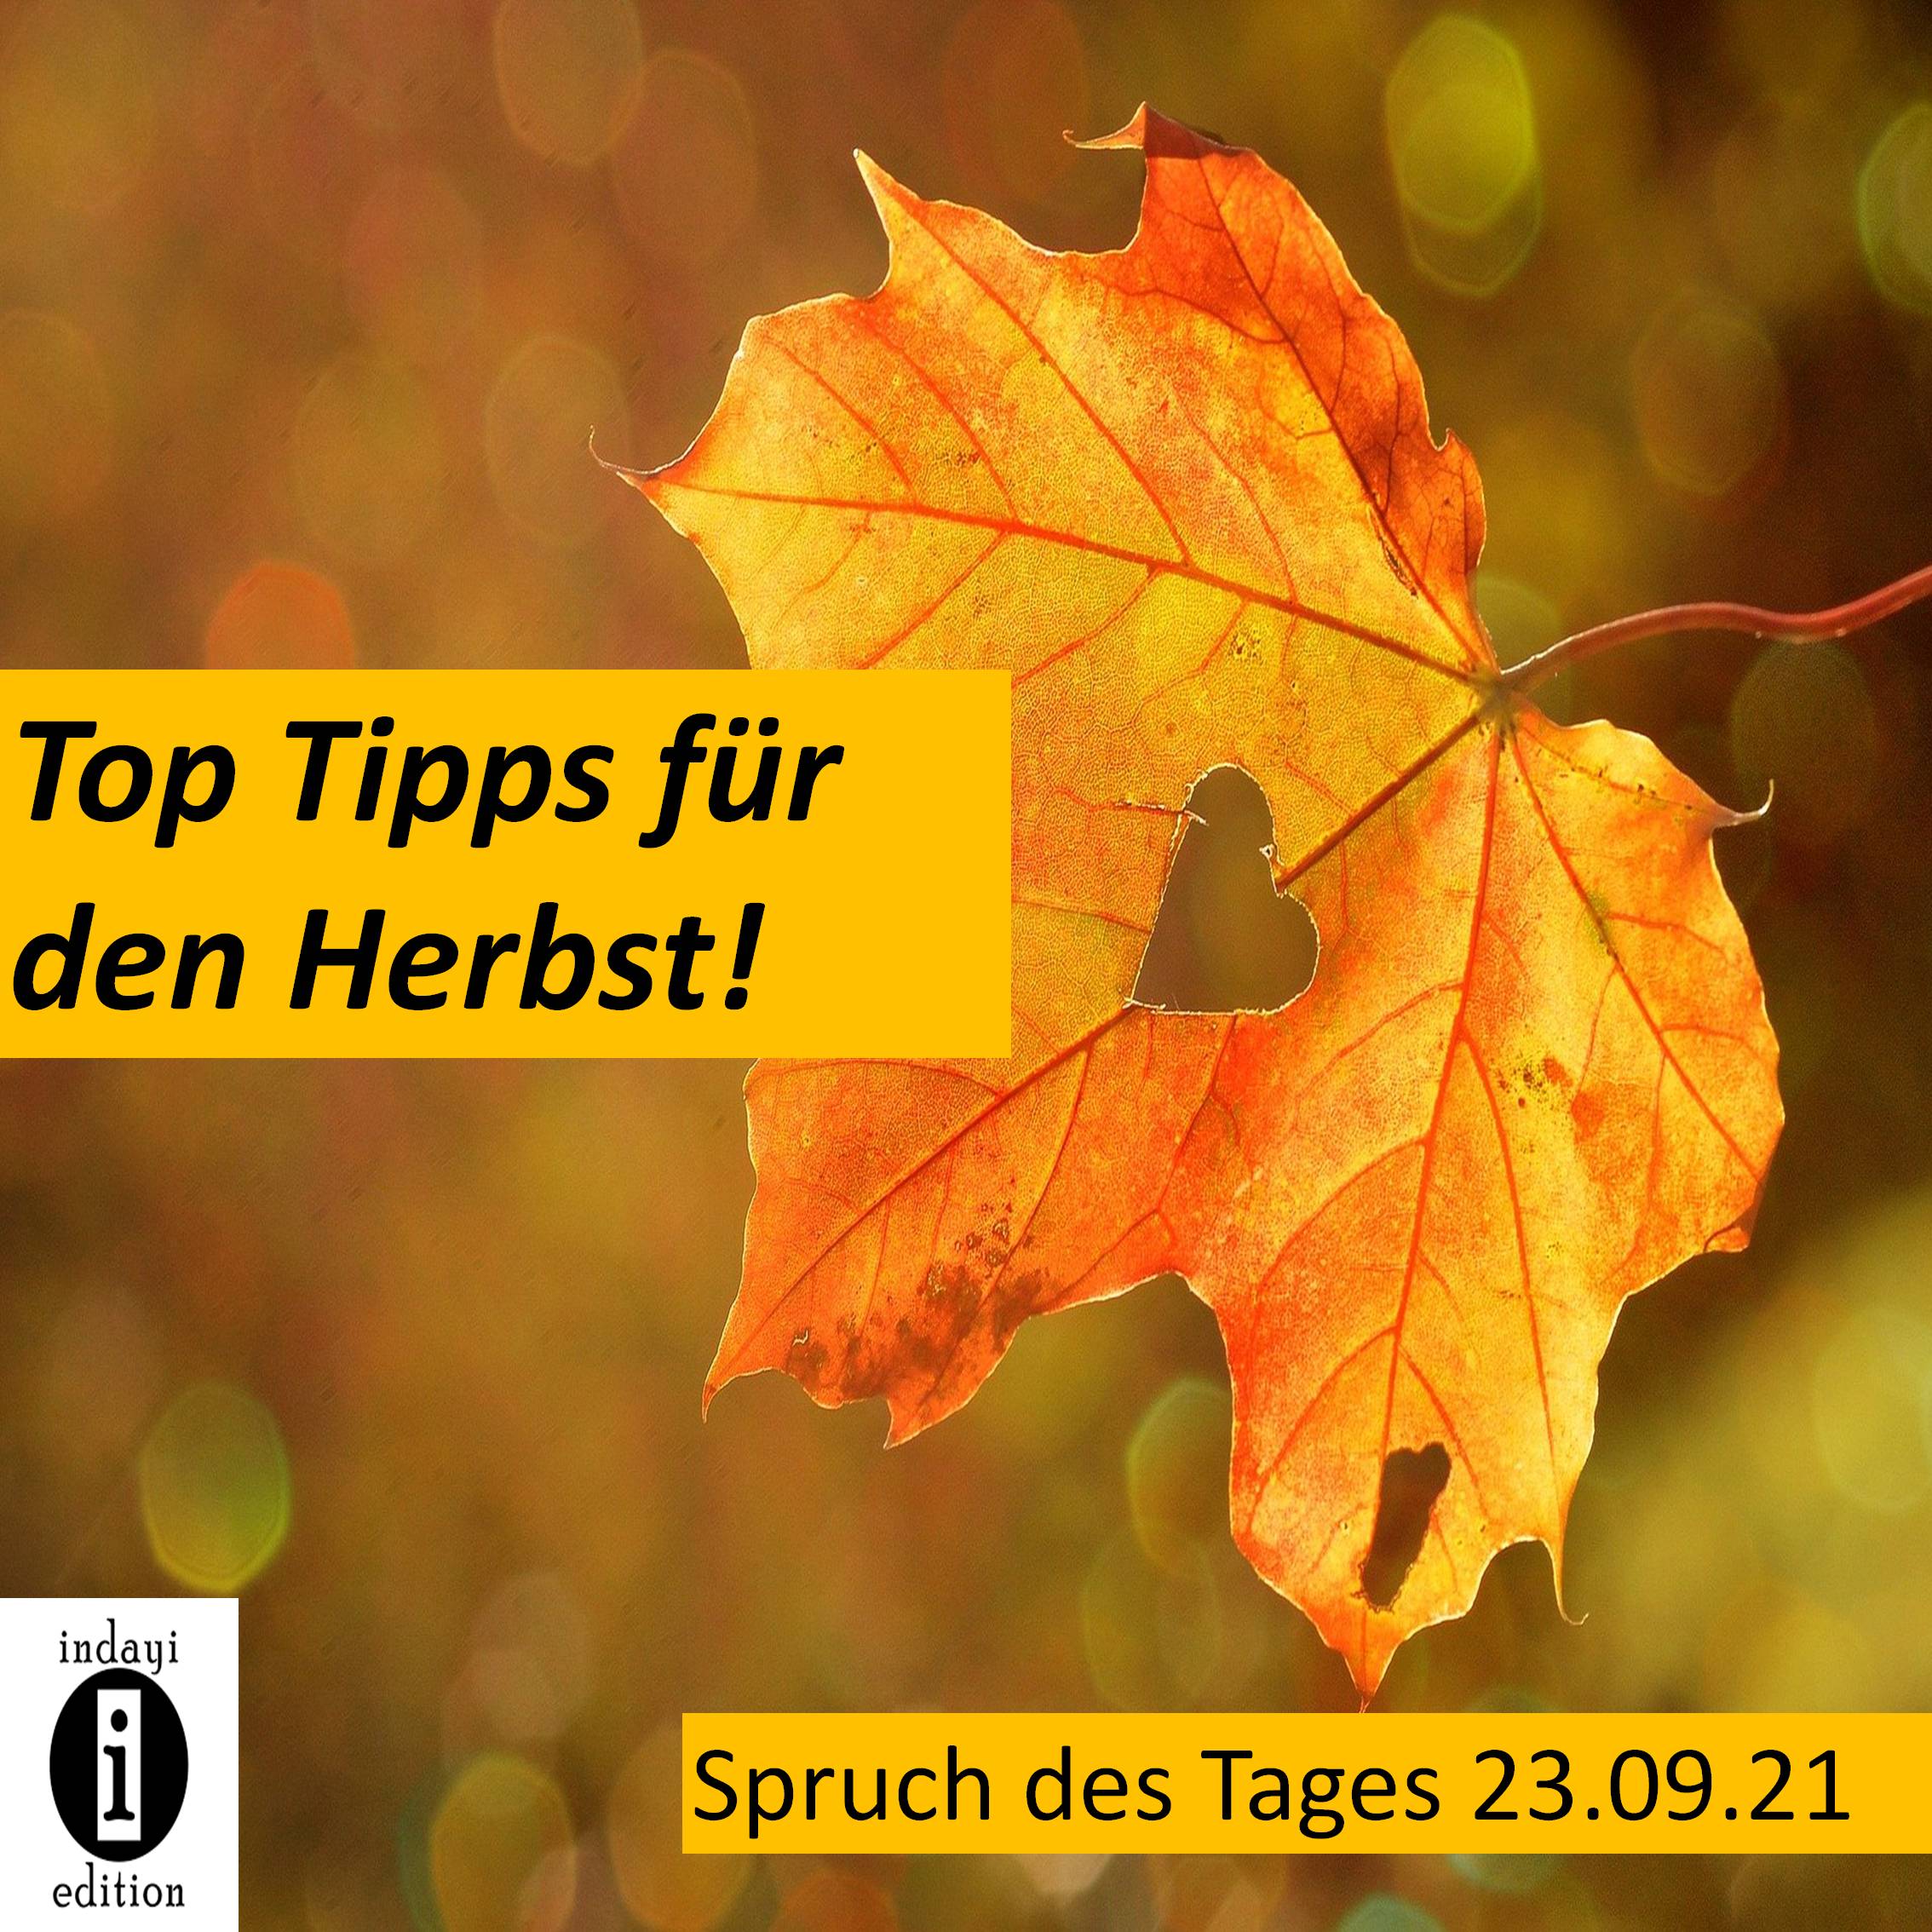 You are currently viewing Unsere Top Tipps für den Herbst! // Spruch des Tages 23.09.21